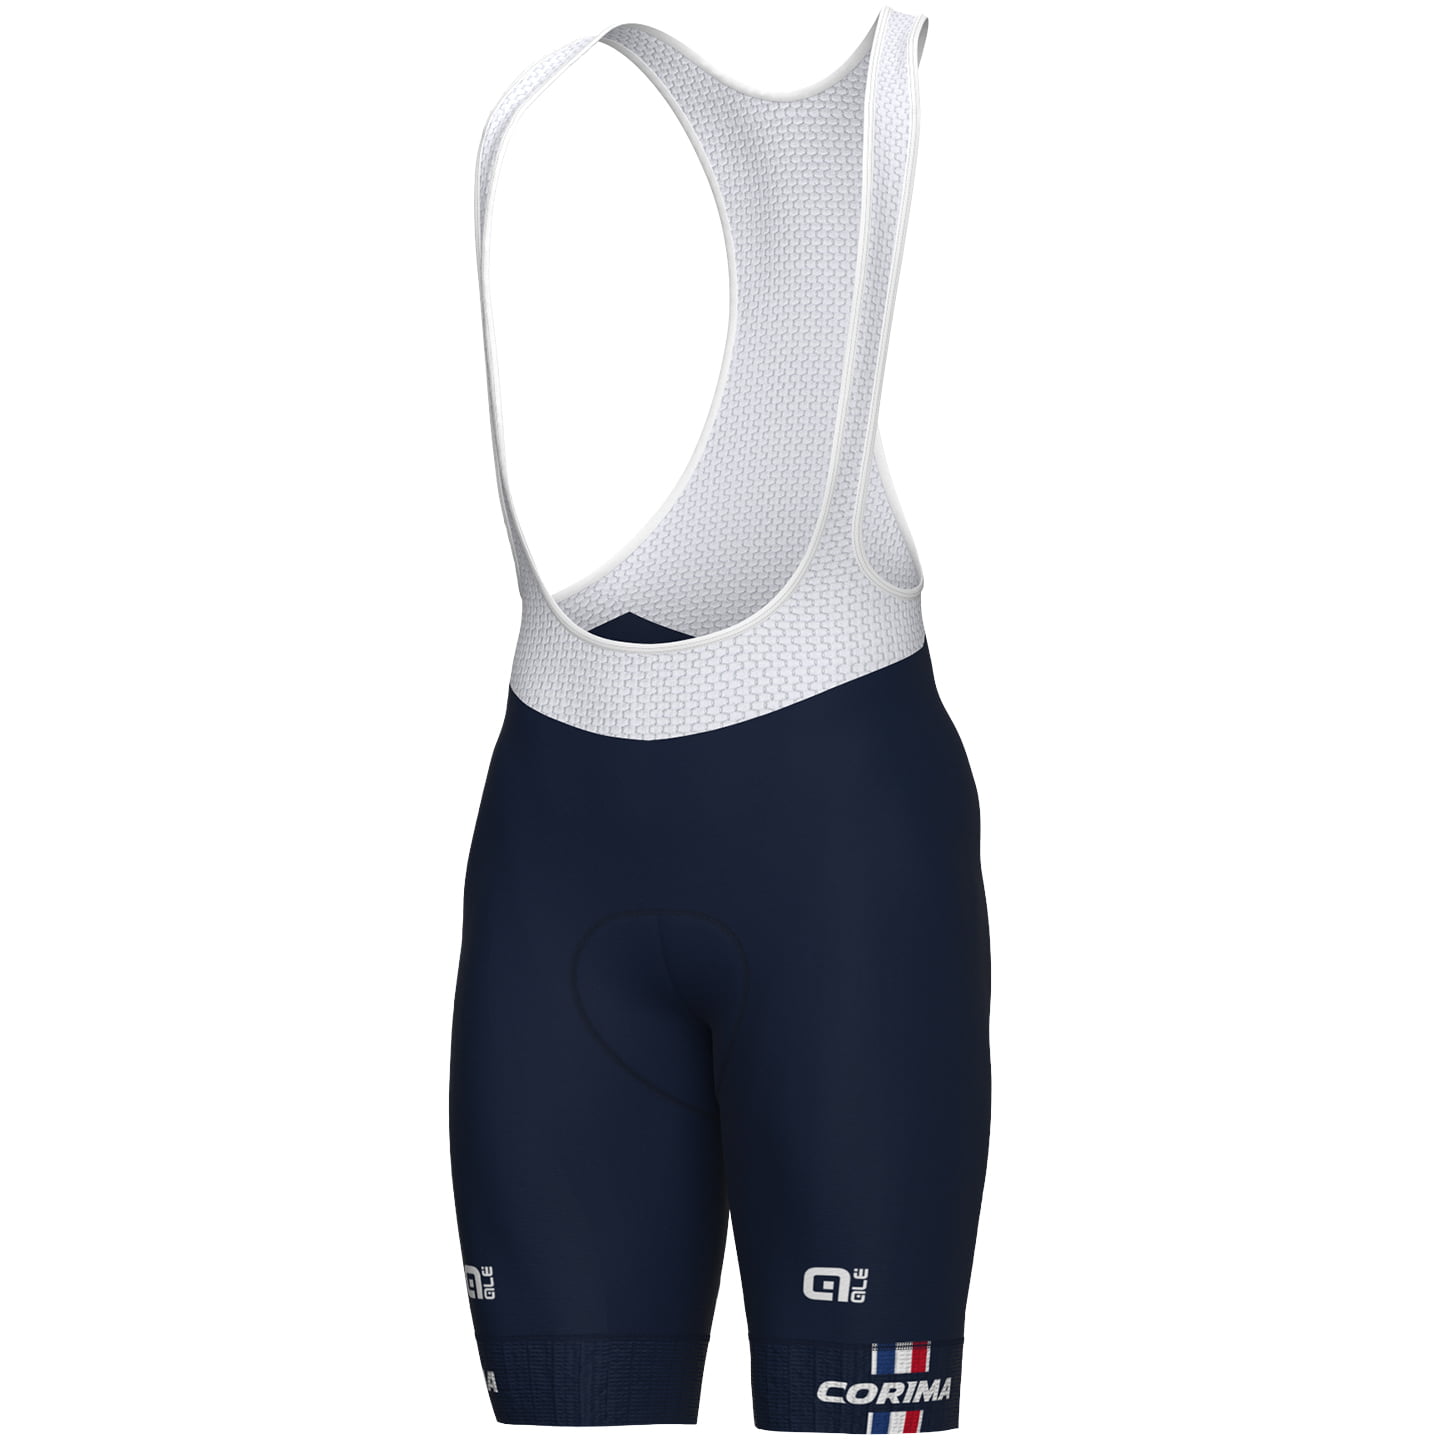 FRENCH NATIONAL TEAM 2023 Bib Shorts, for men, size S, Cycle shorts, Cycling clothing